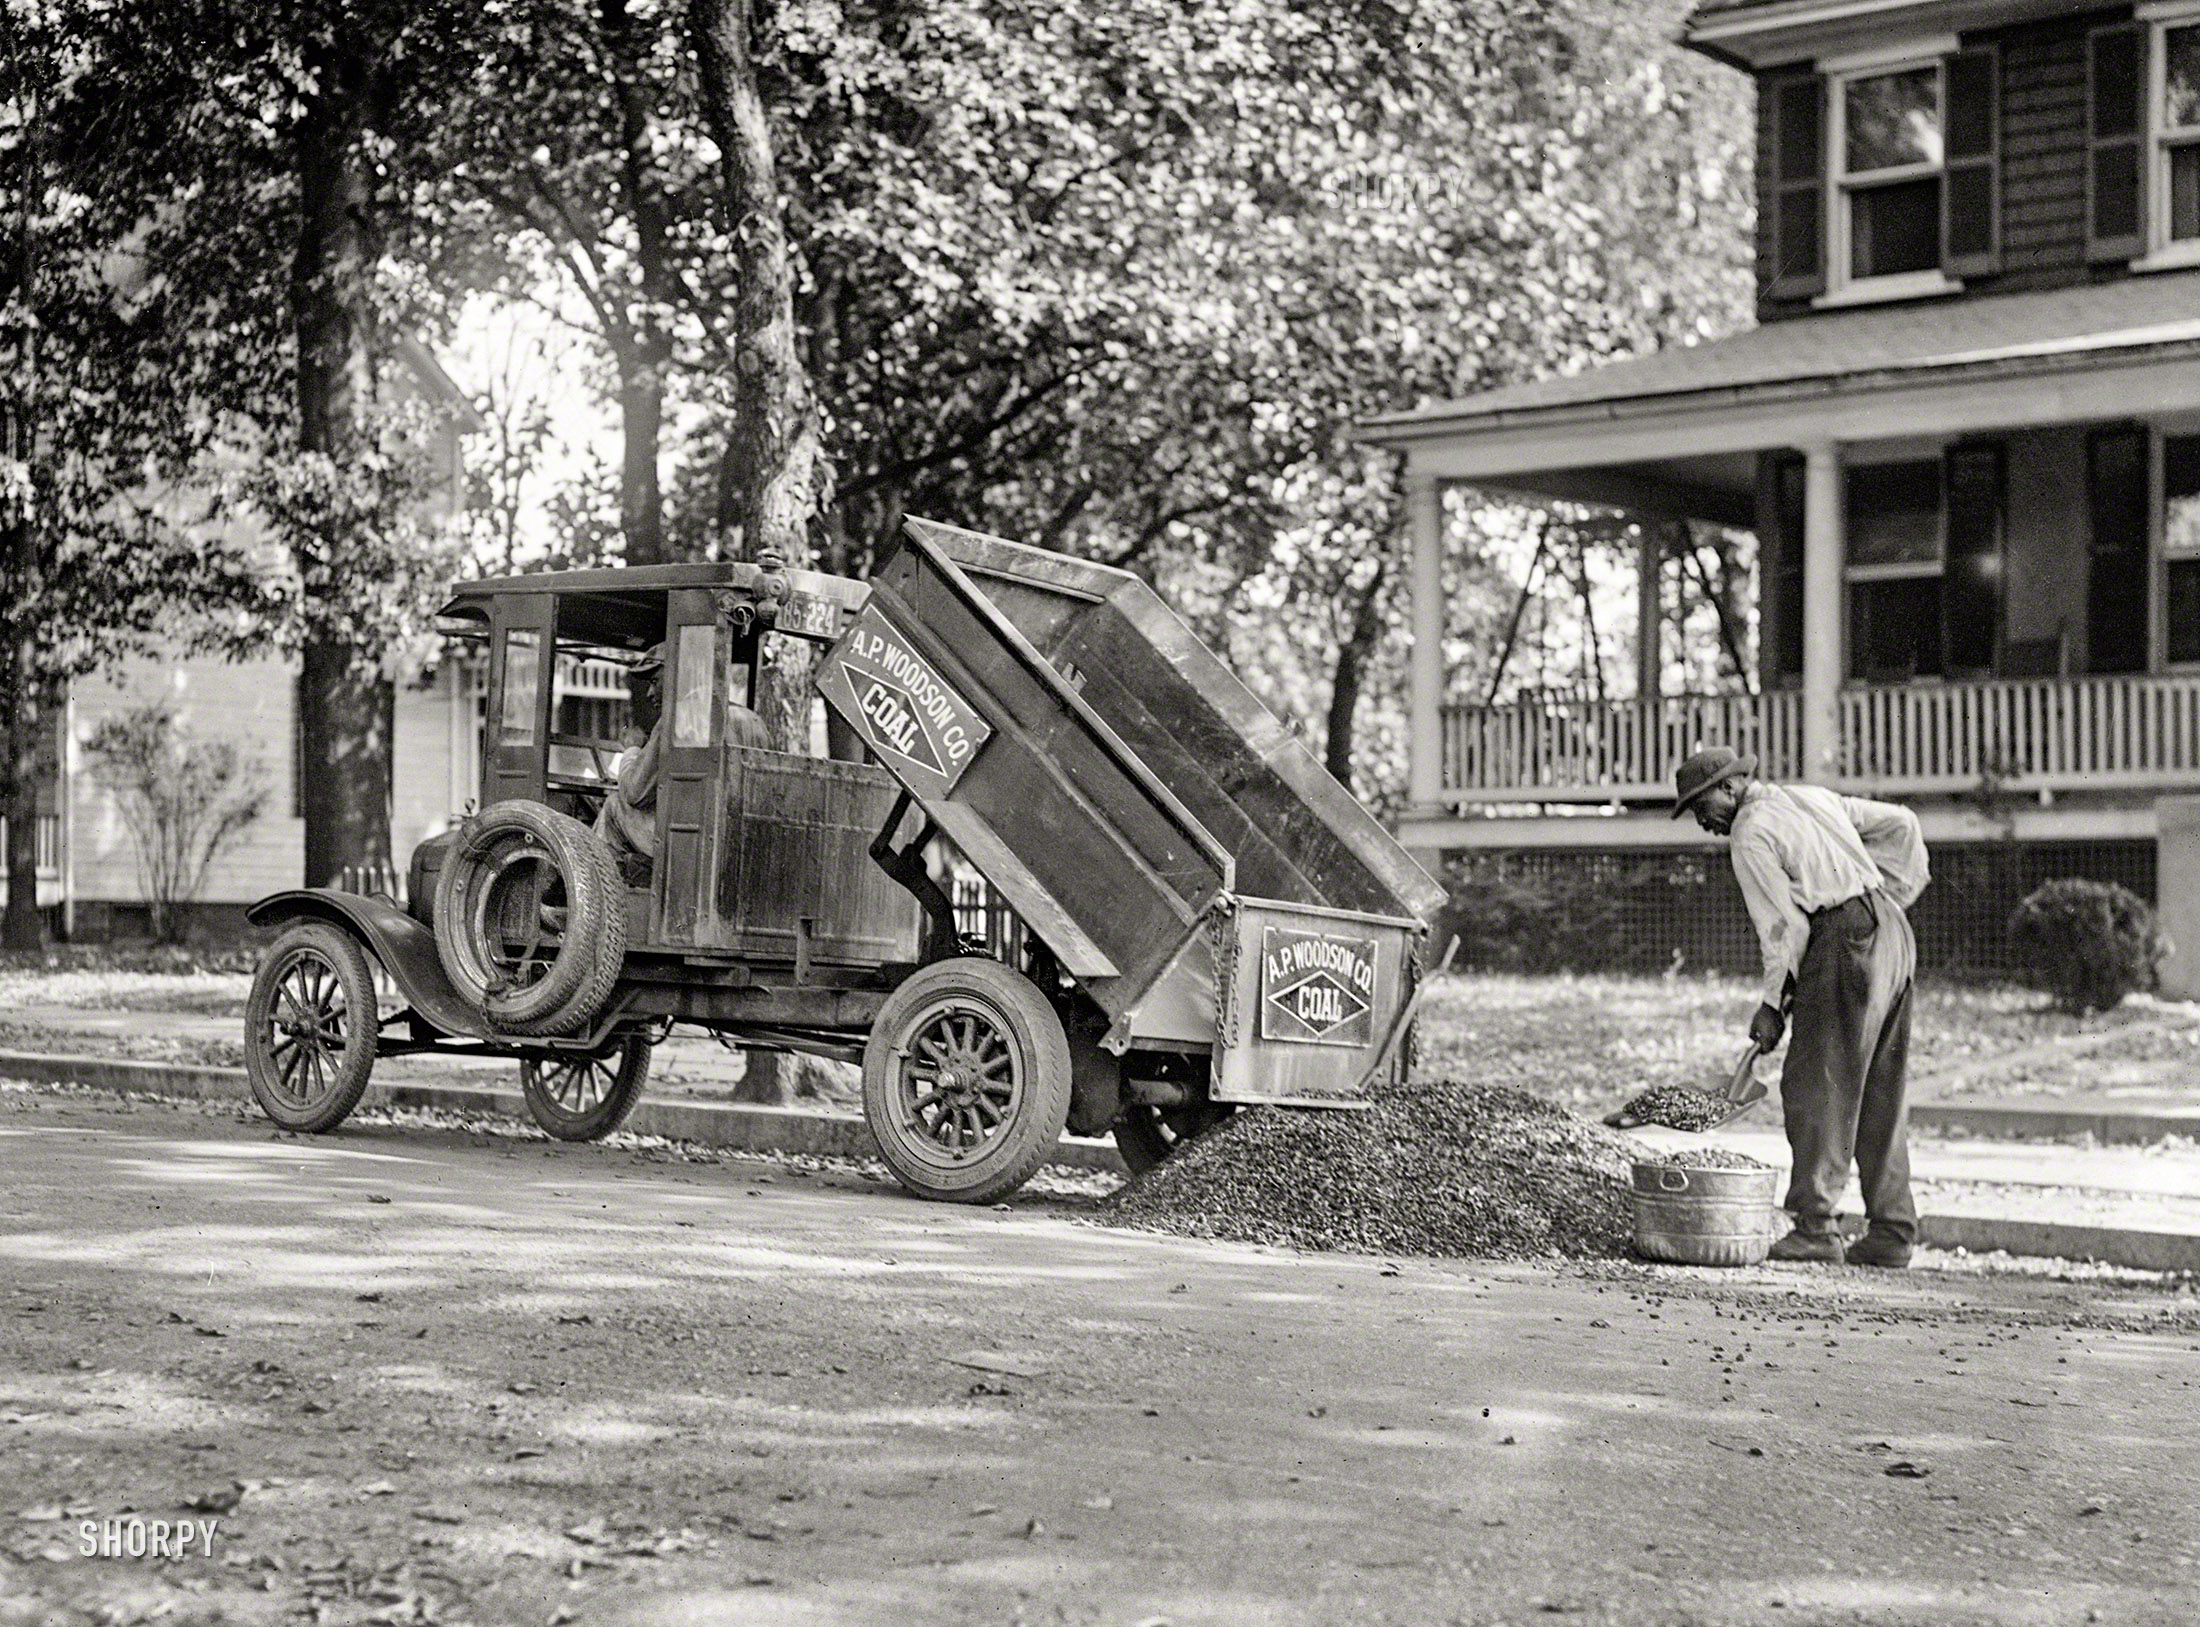 Washington, D.C., 1925. "Ford Motor Co. -- A.P. Woodson Co. coal truck." And now for the hard part. National Photo Co. glass negative. View full size.